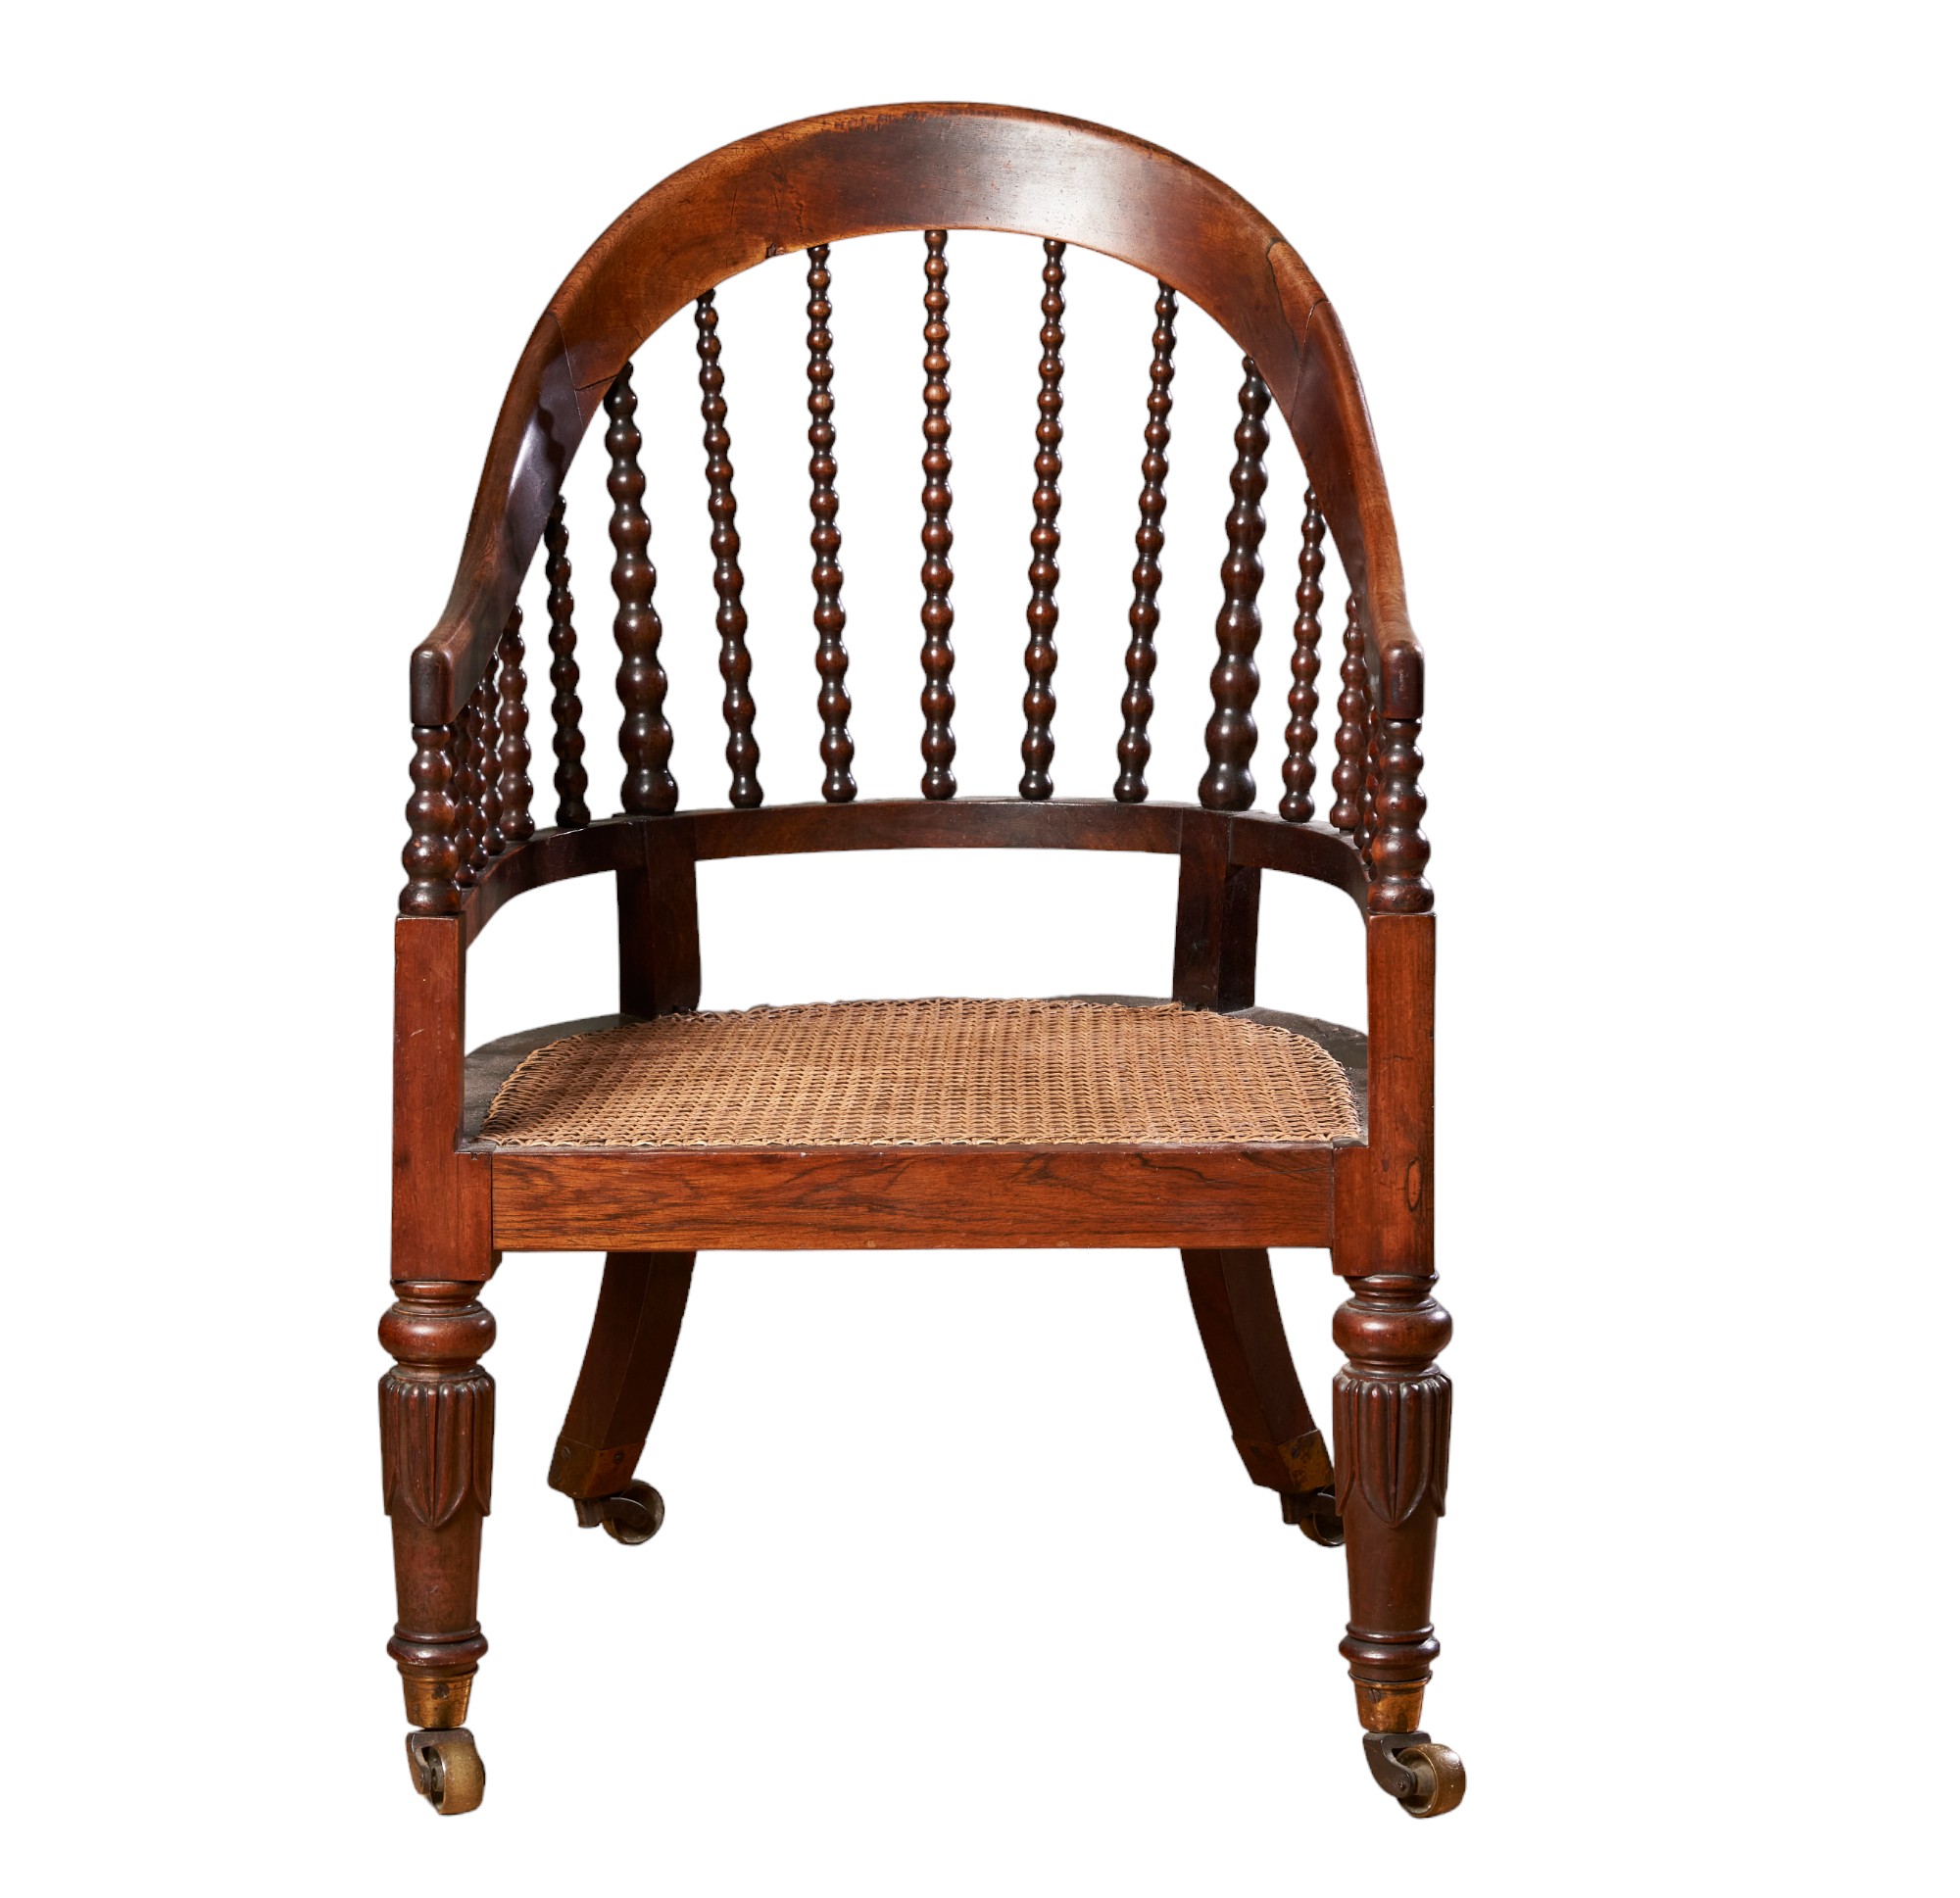 19th century, A bobbin-backed armchair - Image 2 of 2